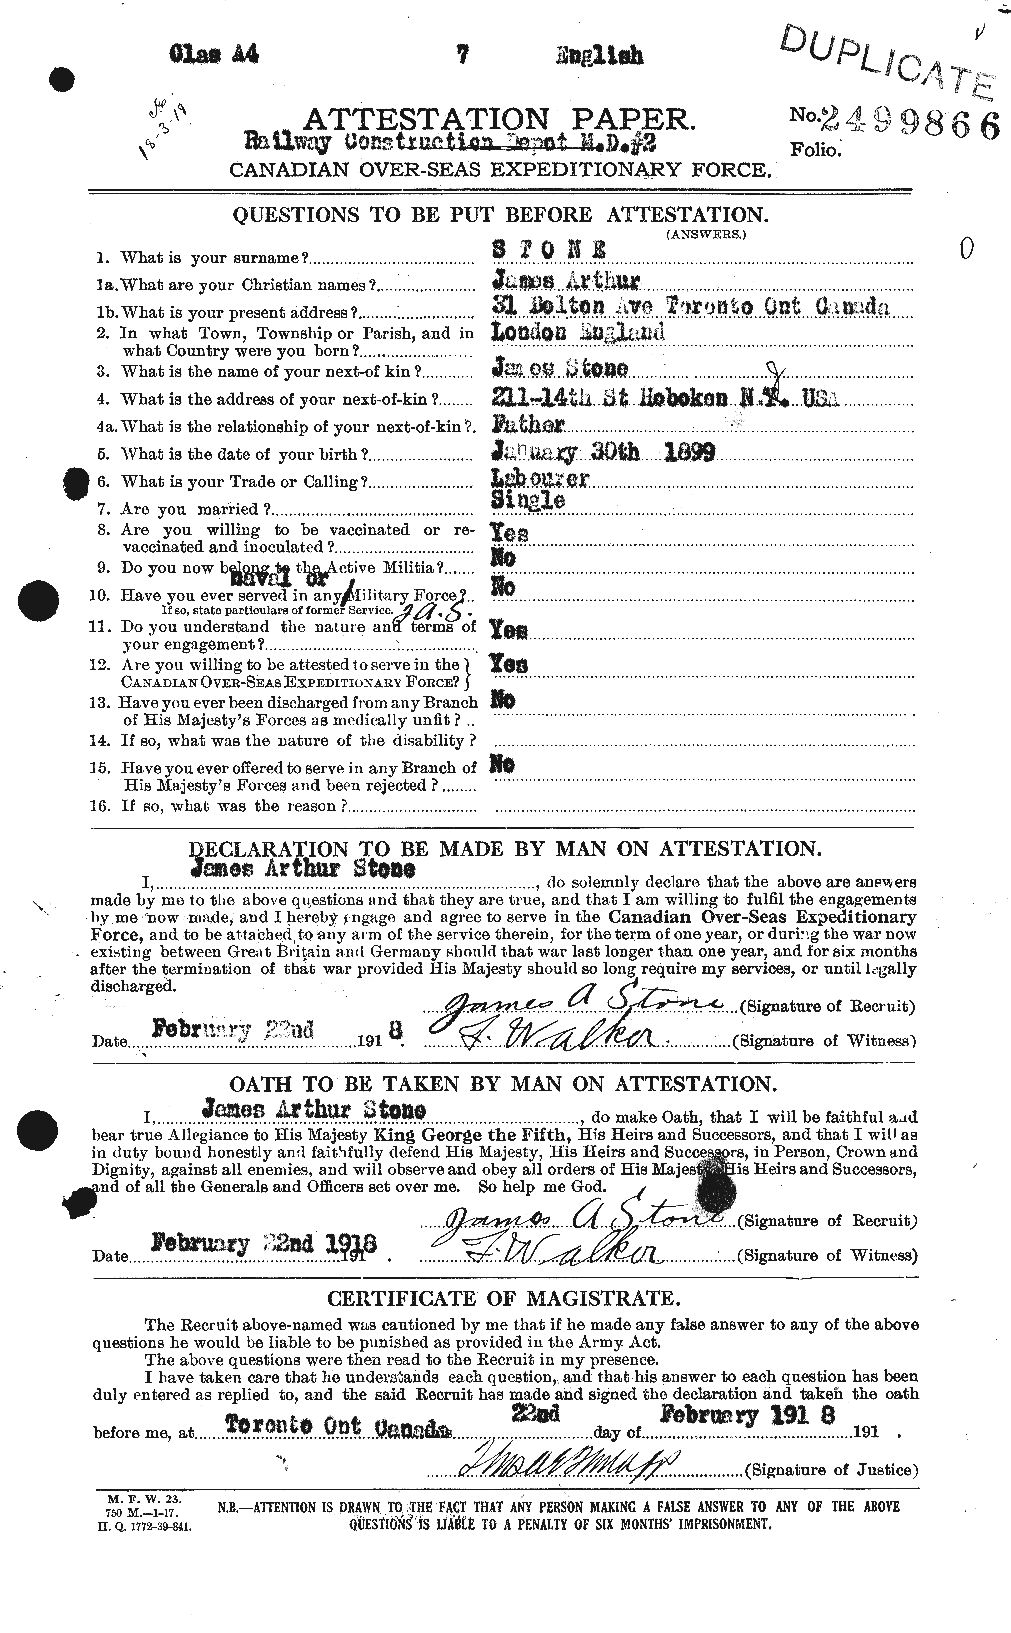 Personnel Records of the First World War - CEF 121960a